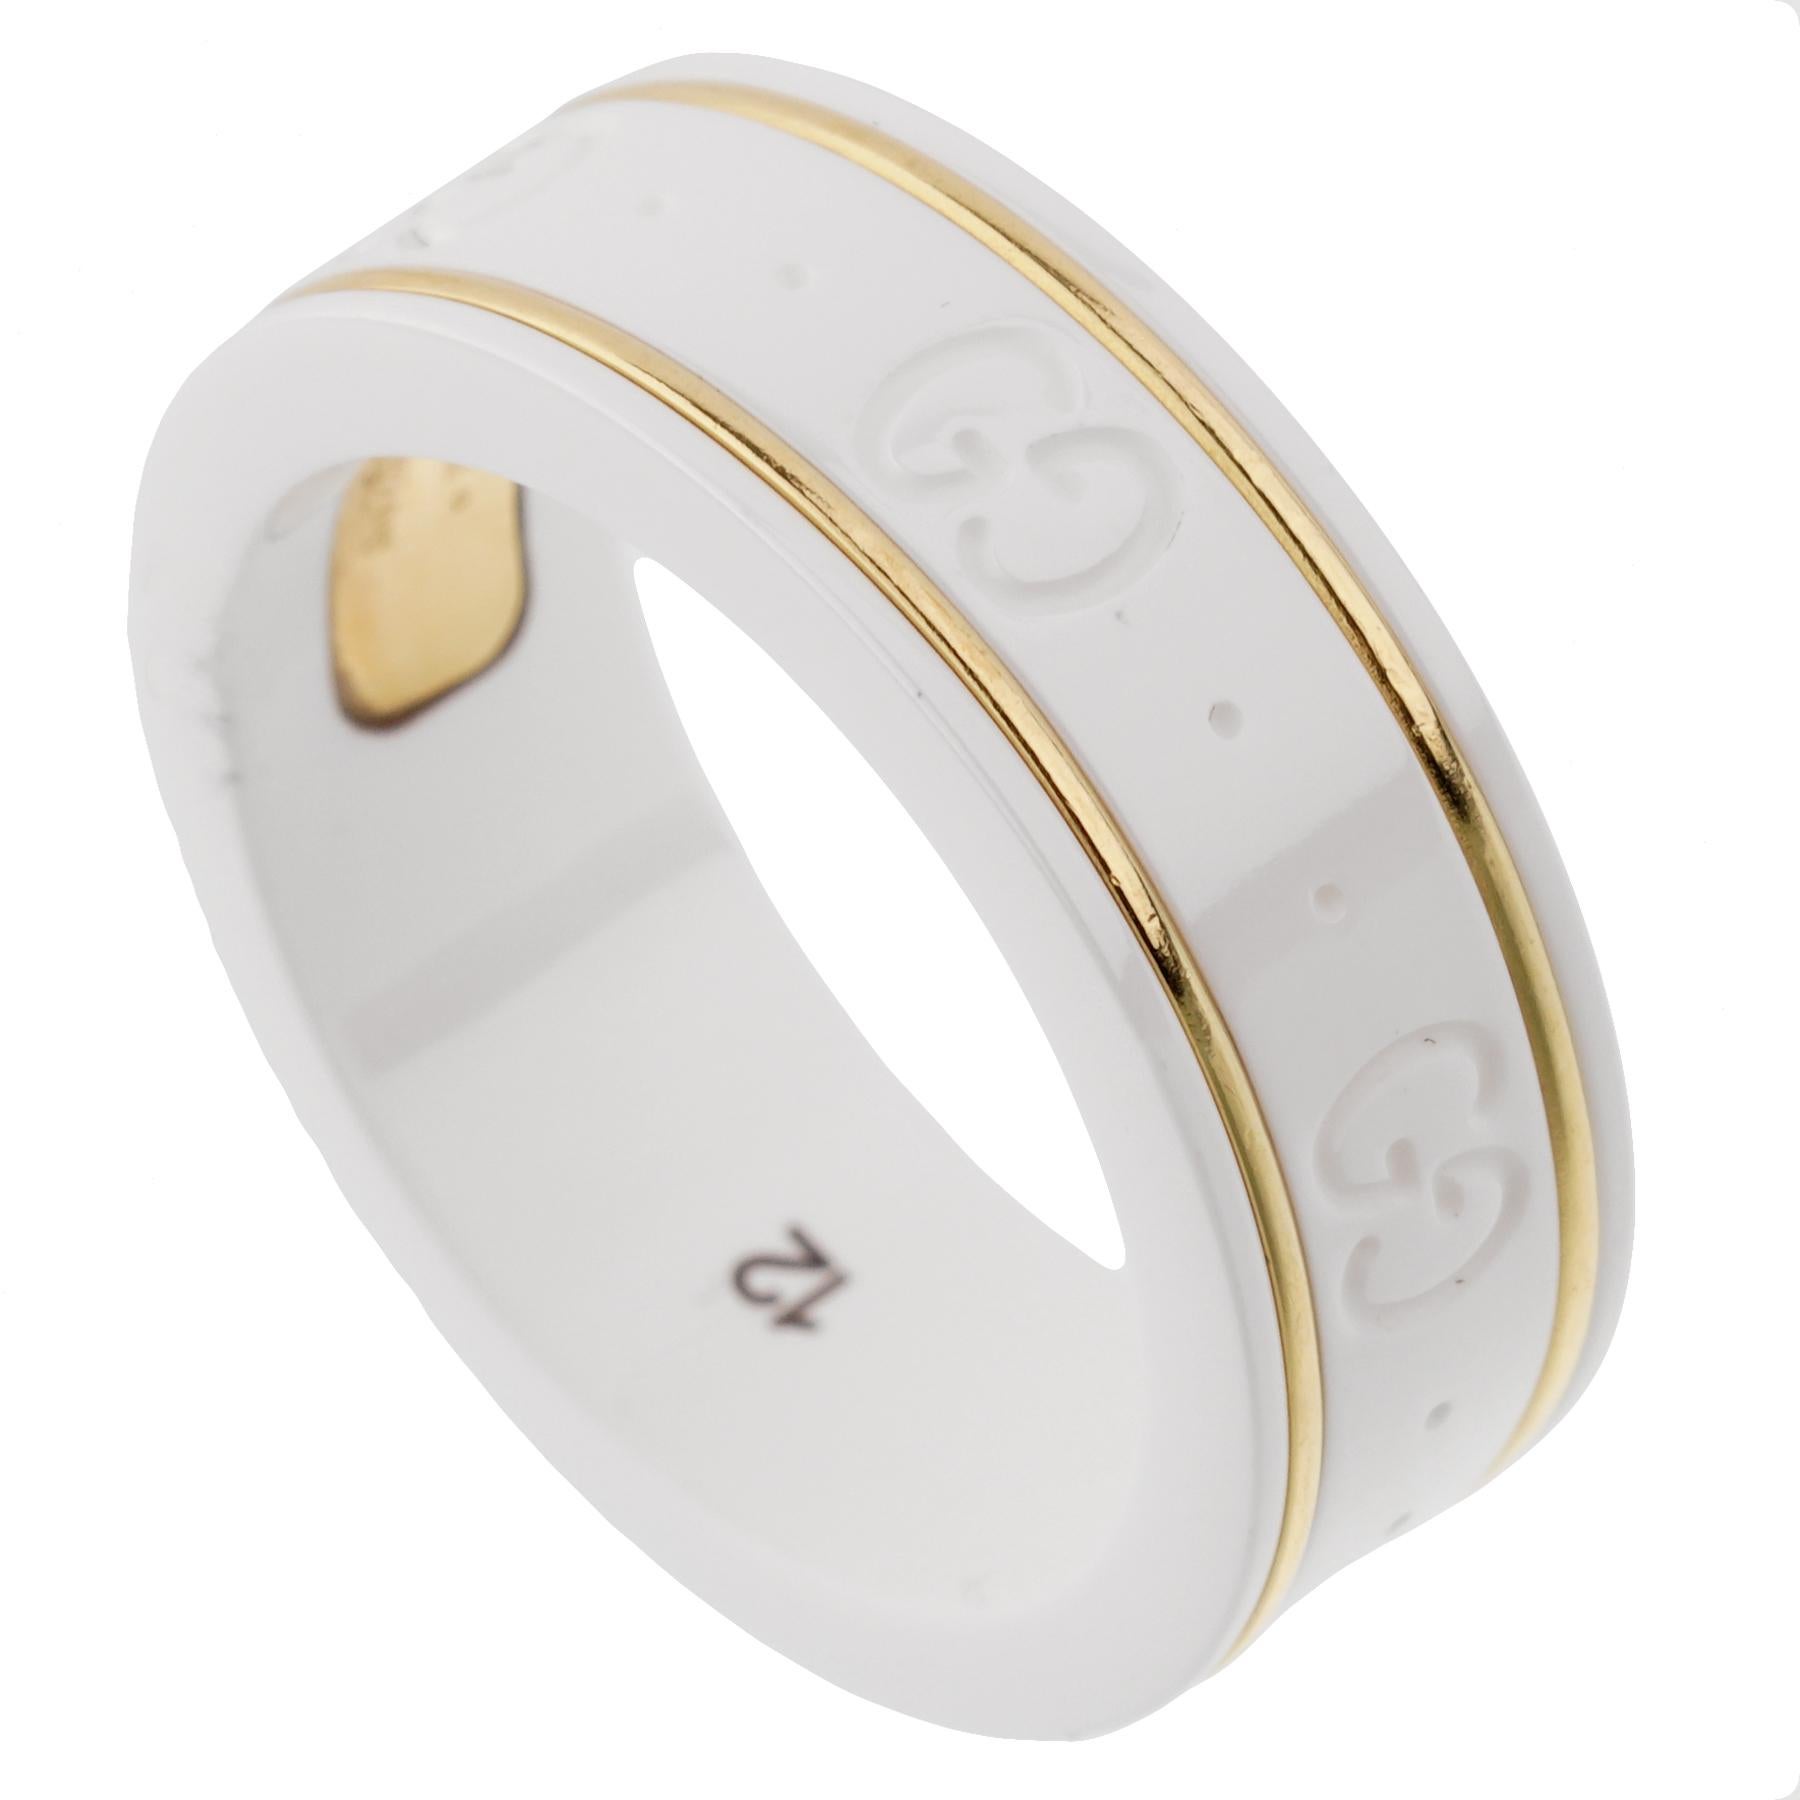 A chic GUCCI ceramic ring showcasing the iconic GG motif encircling the band with 2 gold bands. The ring measures a size 6